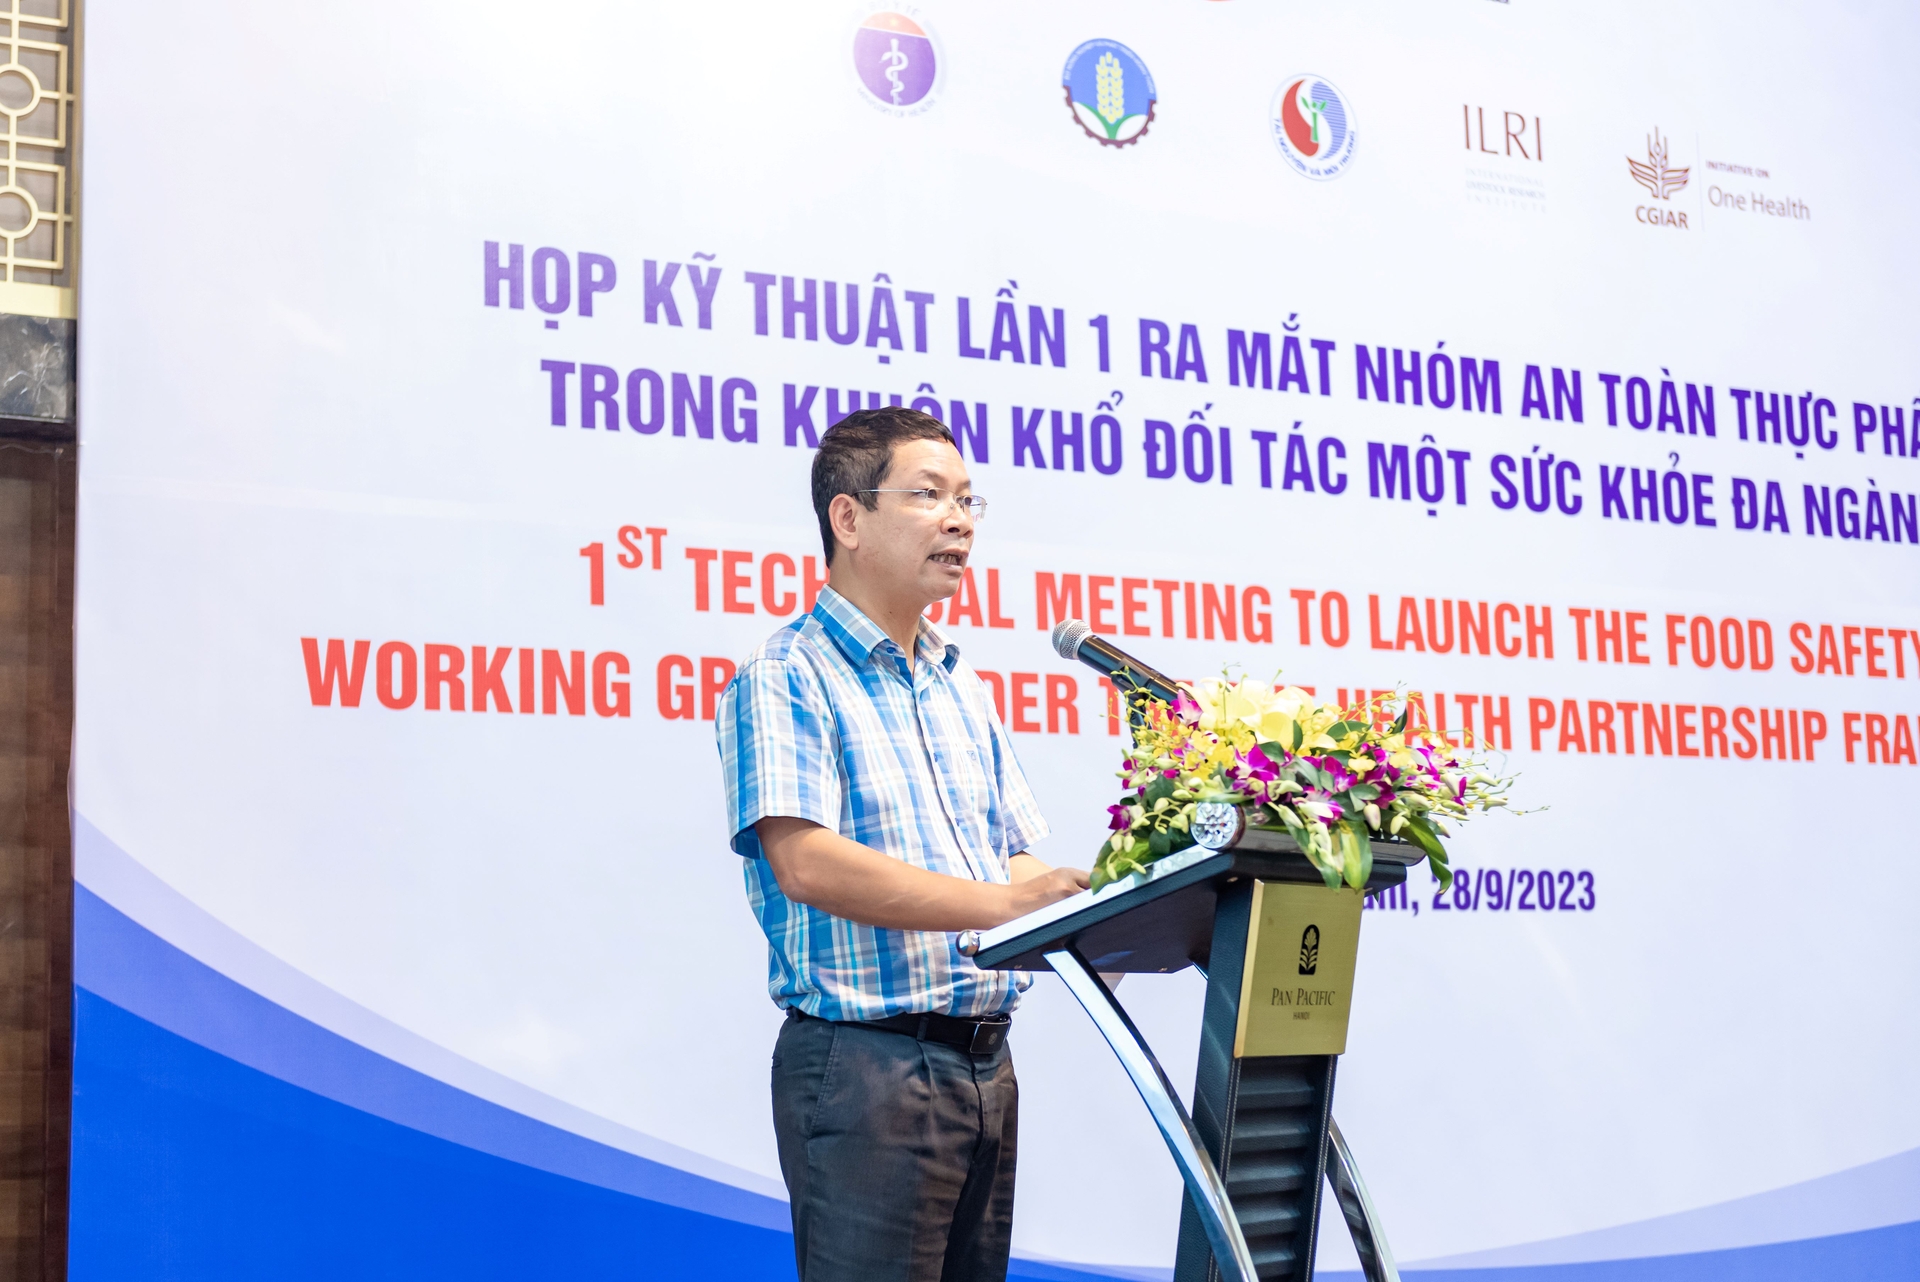 Mr. Vu Thanh Liem, Deputy Director of the nternational Cooperation Department (MARD), Head of the One Health Partnership Secretariat speaking at the event. Photo: Ngoc Son.